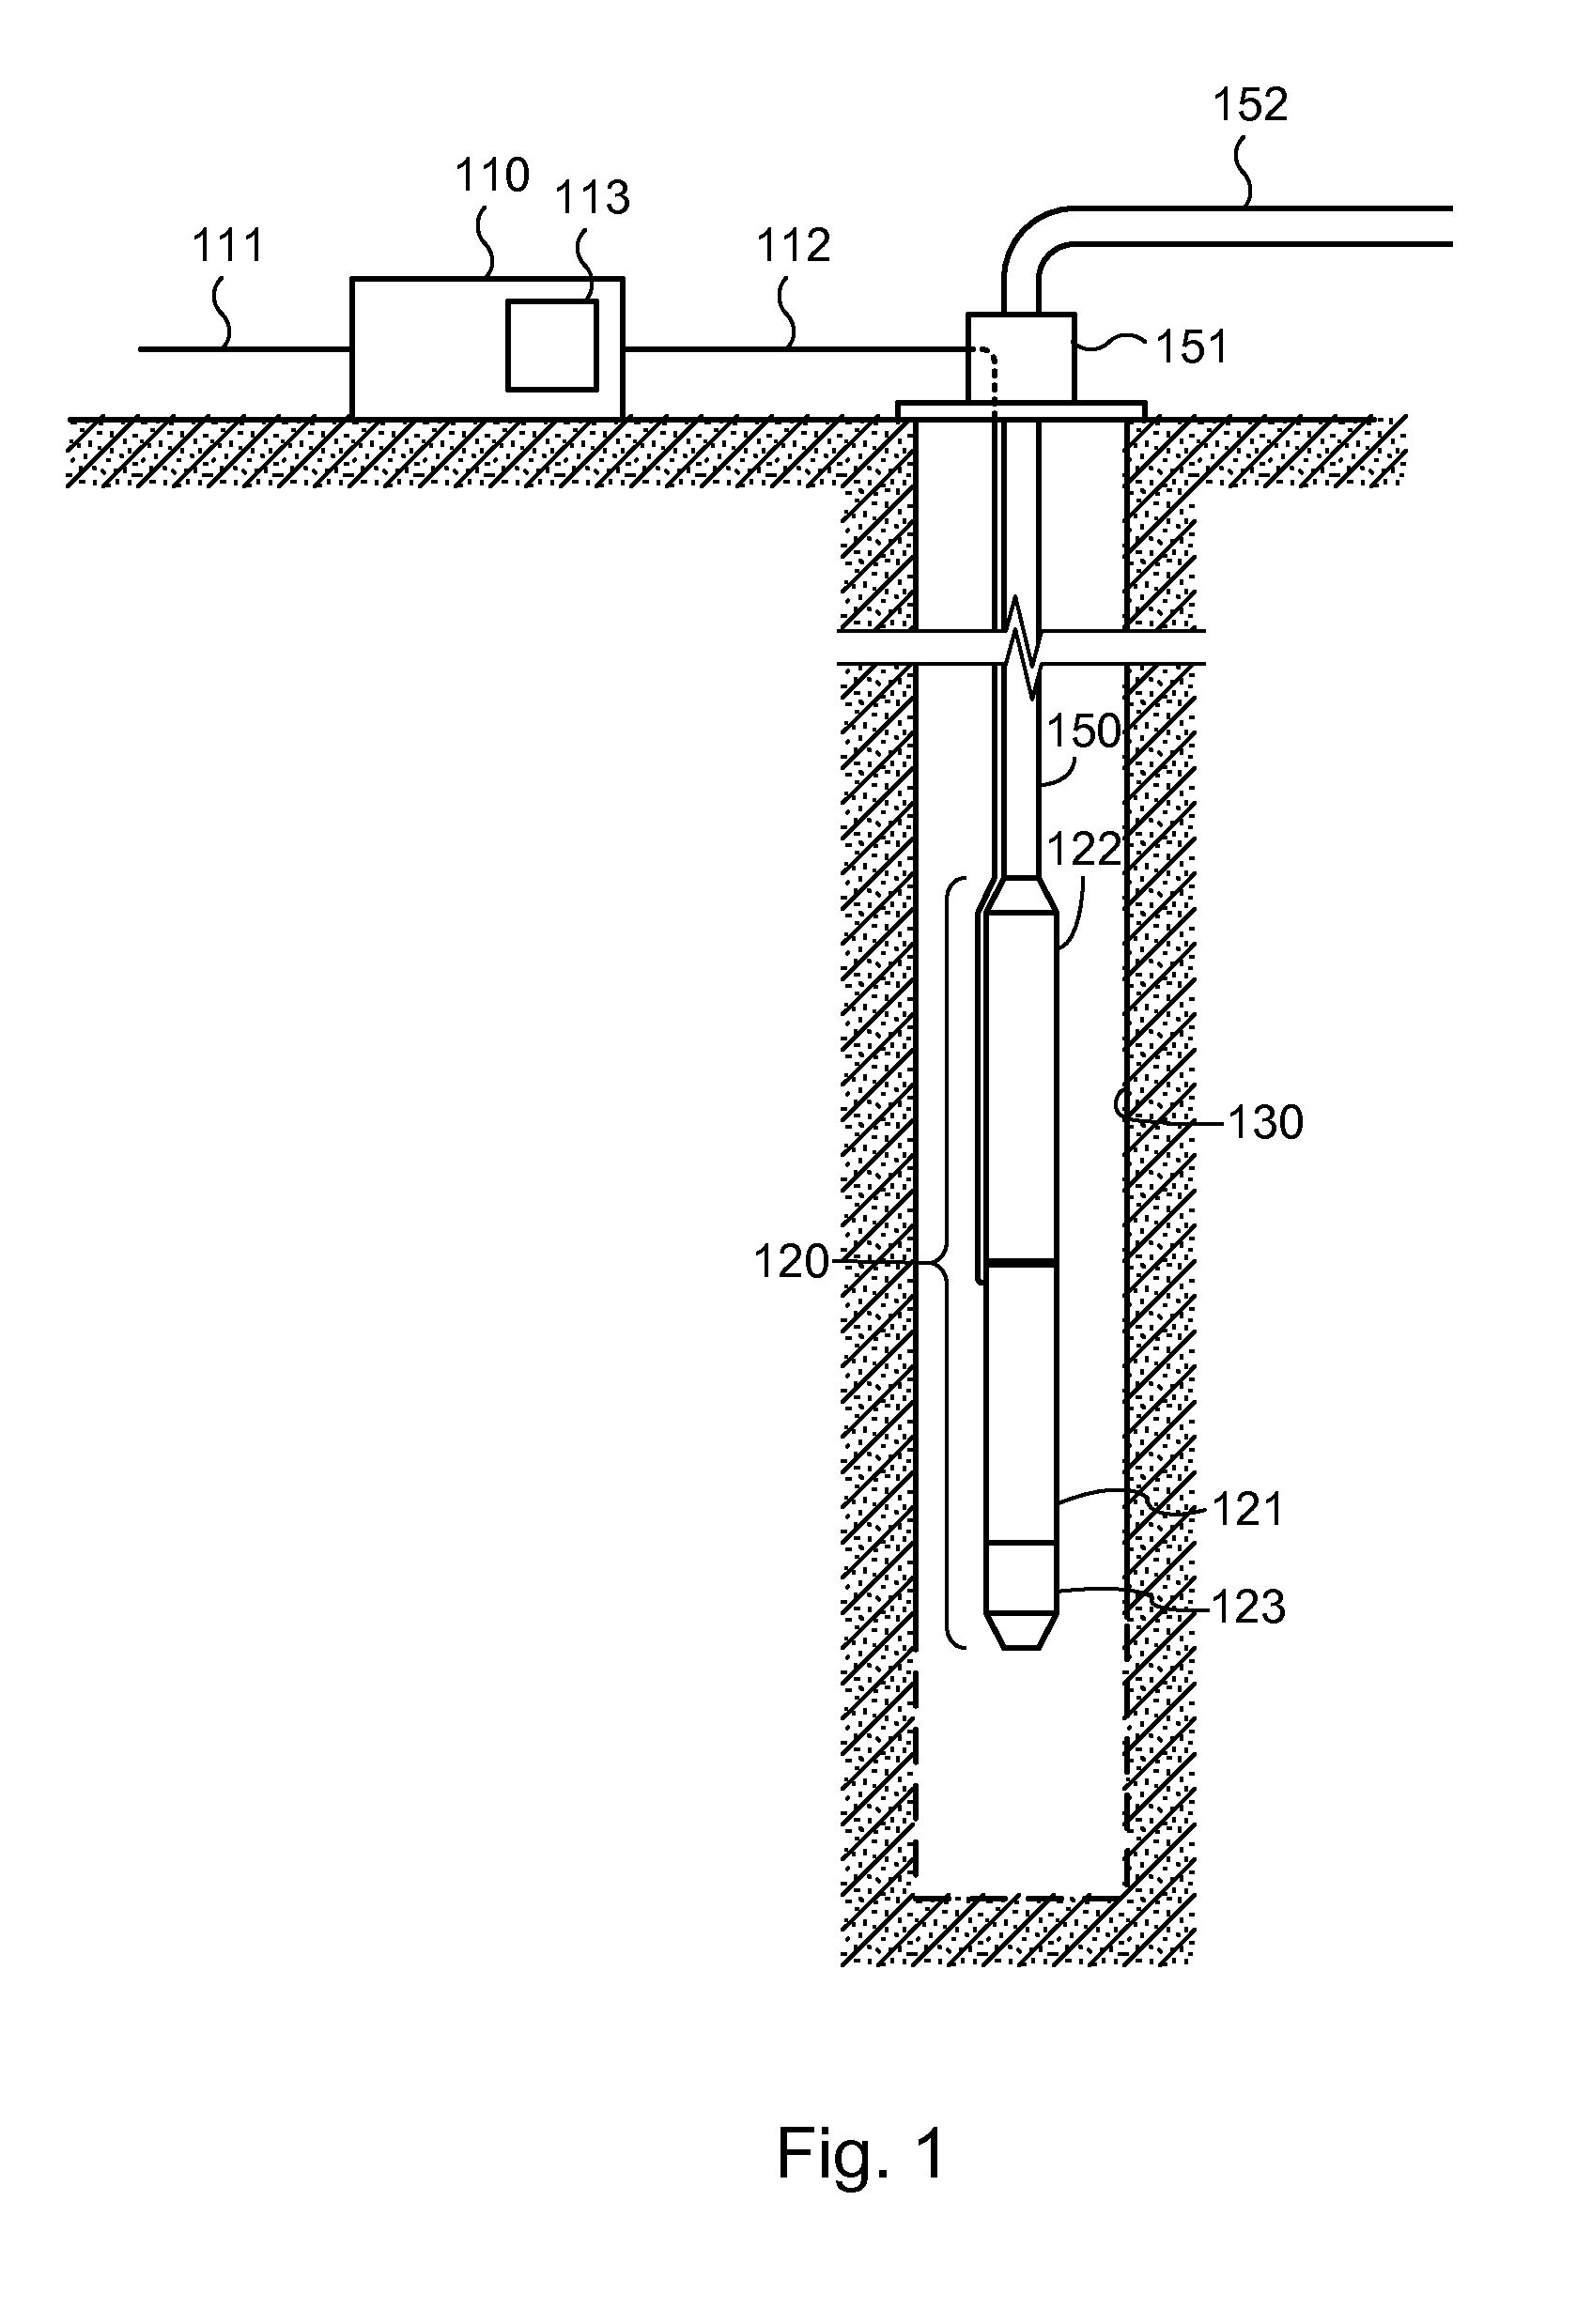 Systems and Methods for Double Data Rate Communication Via Power Cable